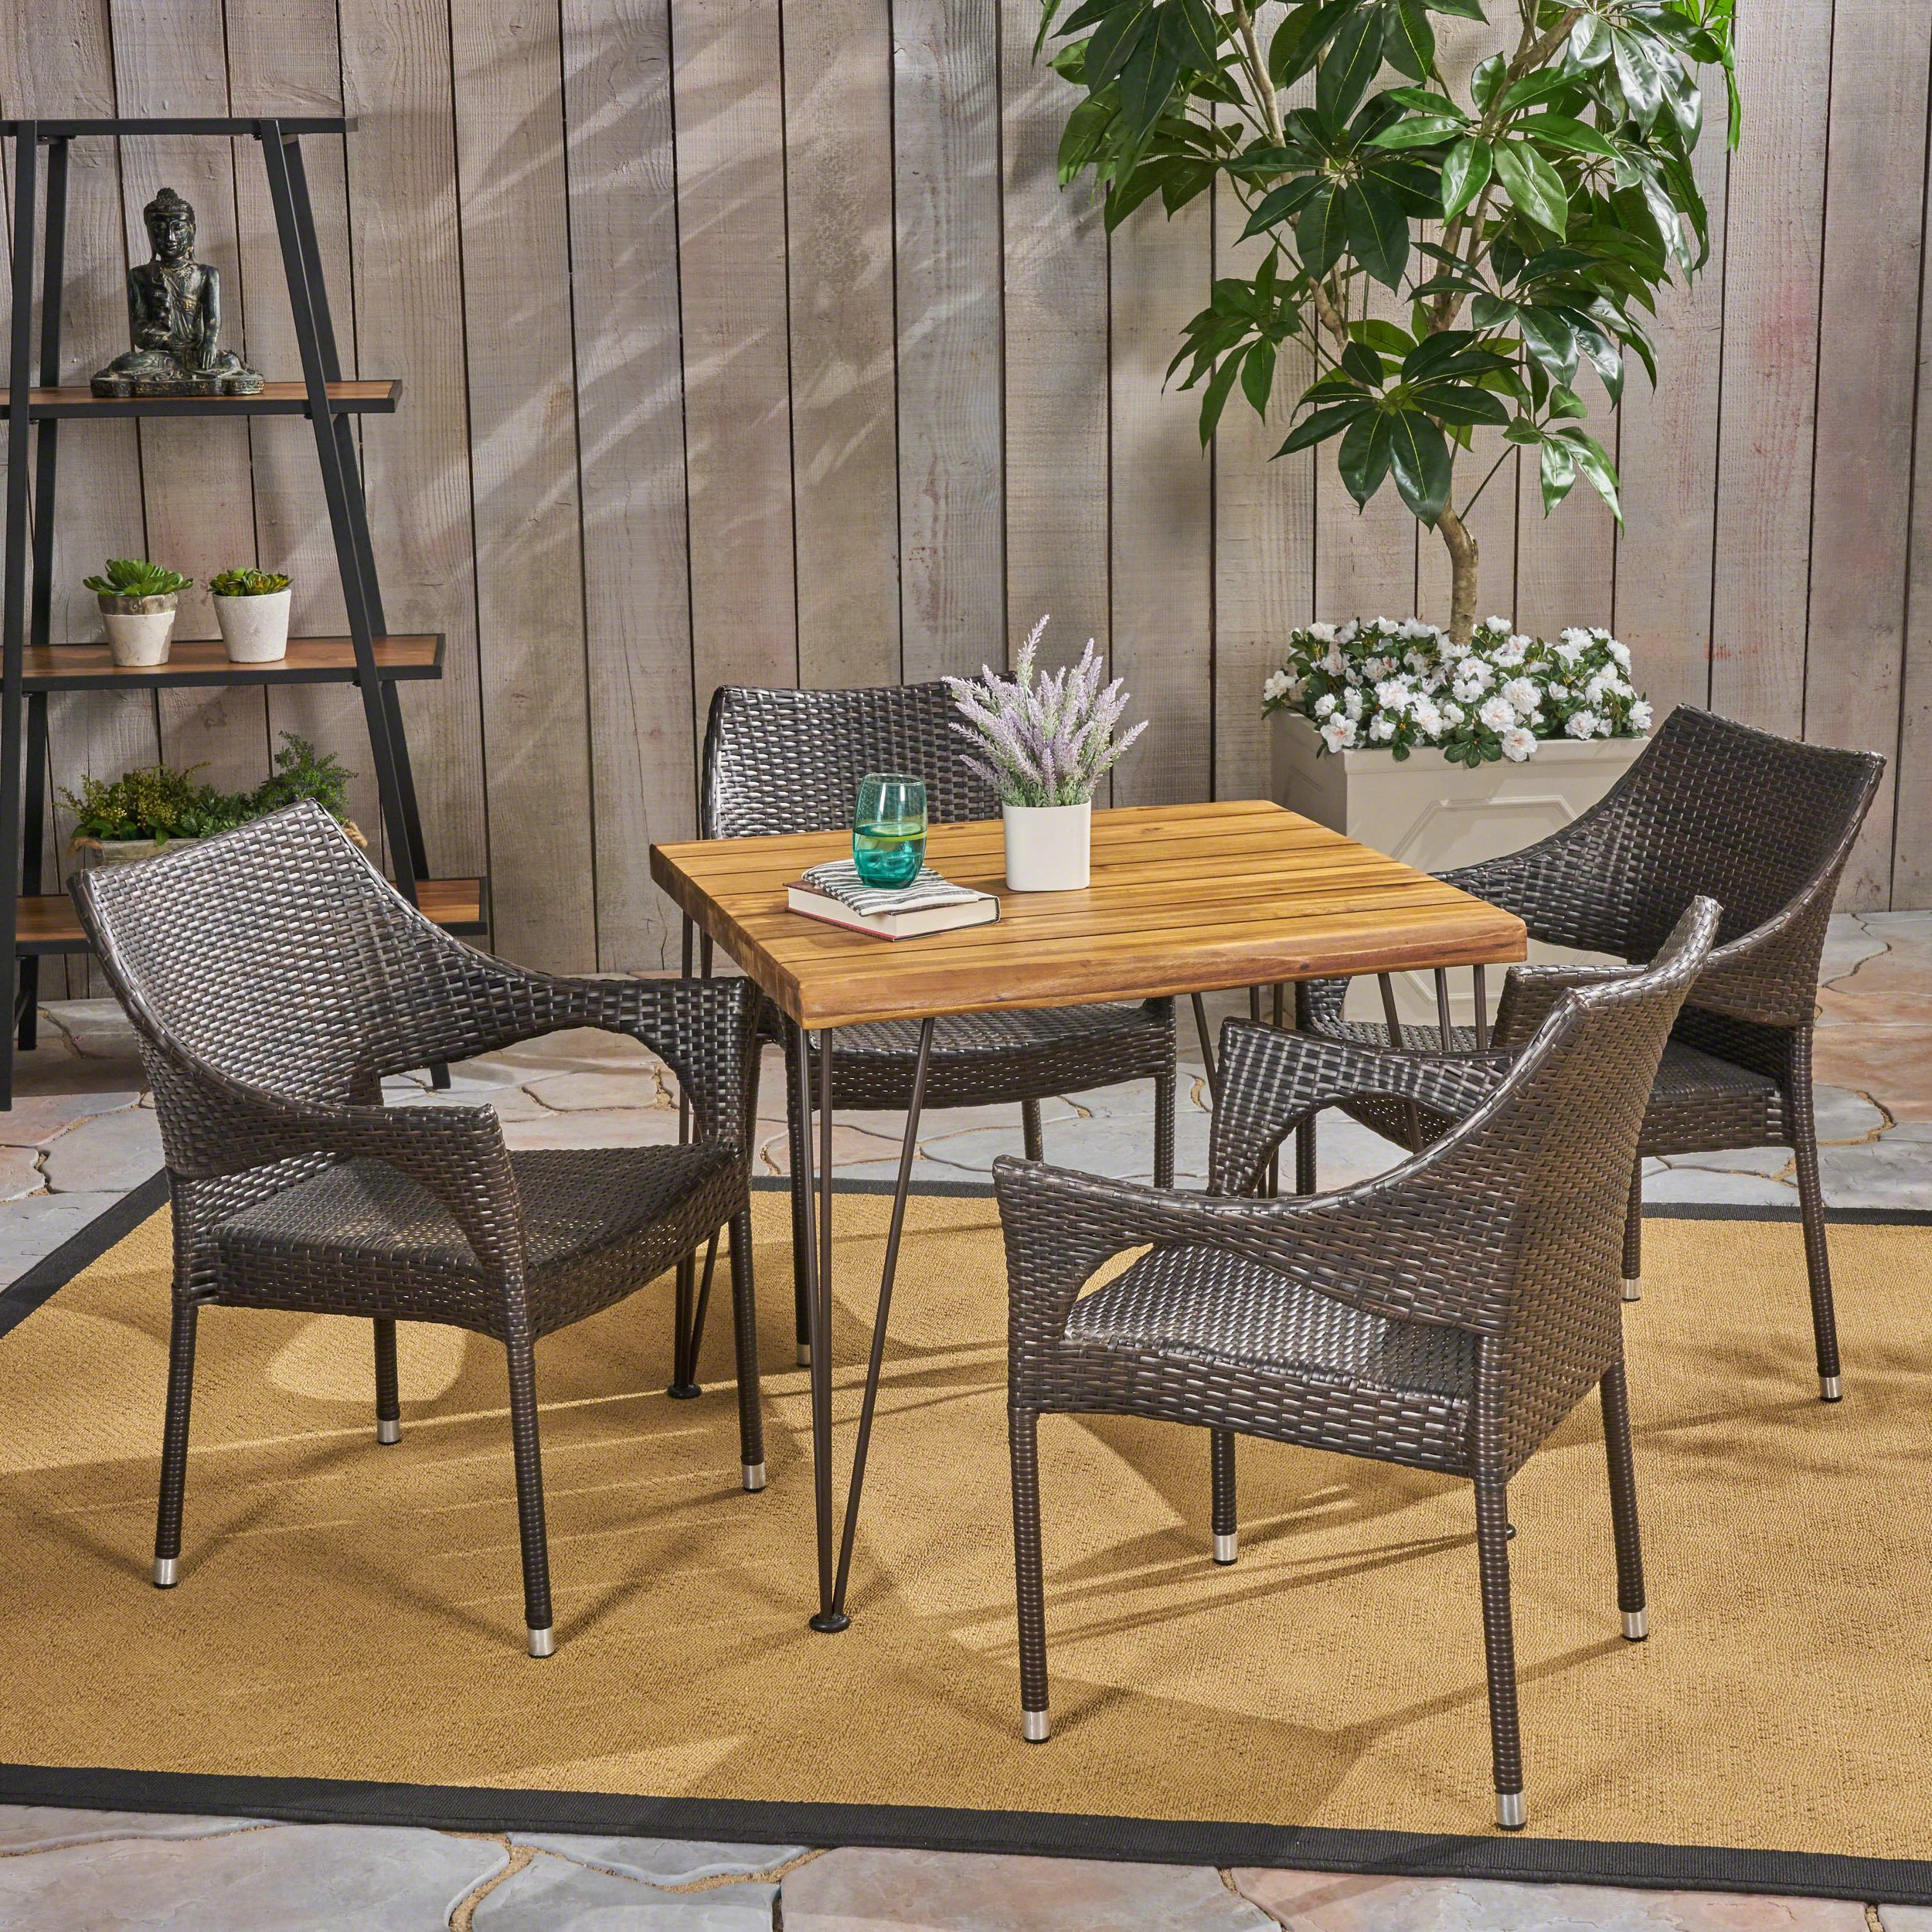 Arya Outdoor 5 Piece Industrial Wood And Wicker Square Dining Set Throughout Preferred Teak And Wicker Dining Sets (View 5 of 15)